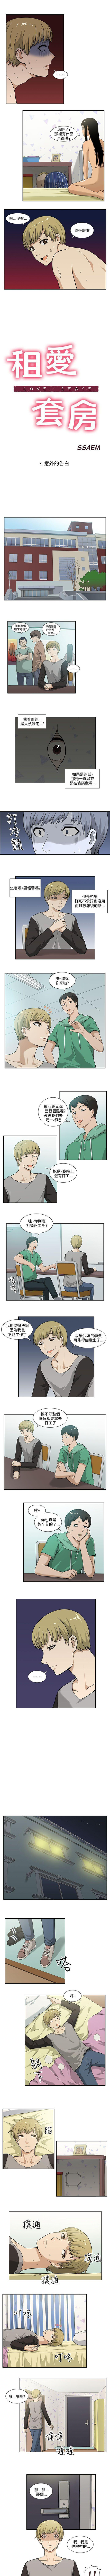 Jerking Off 租愛套房 1-30 Perverted - Page 8